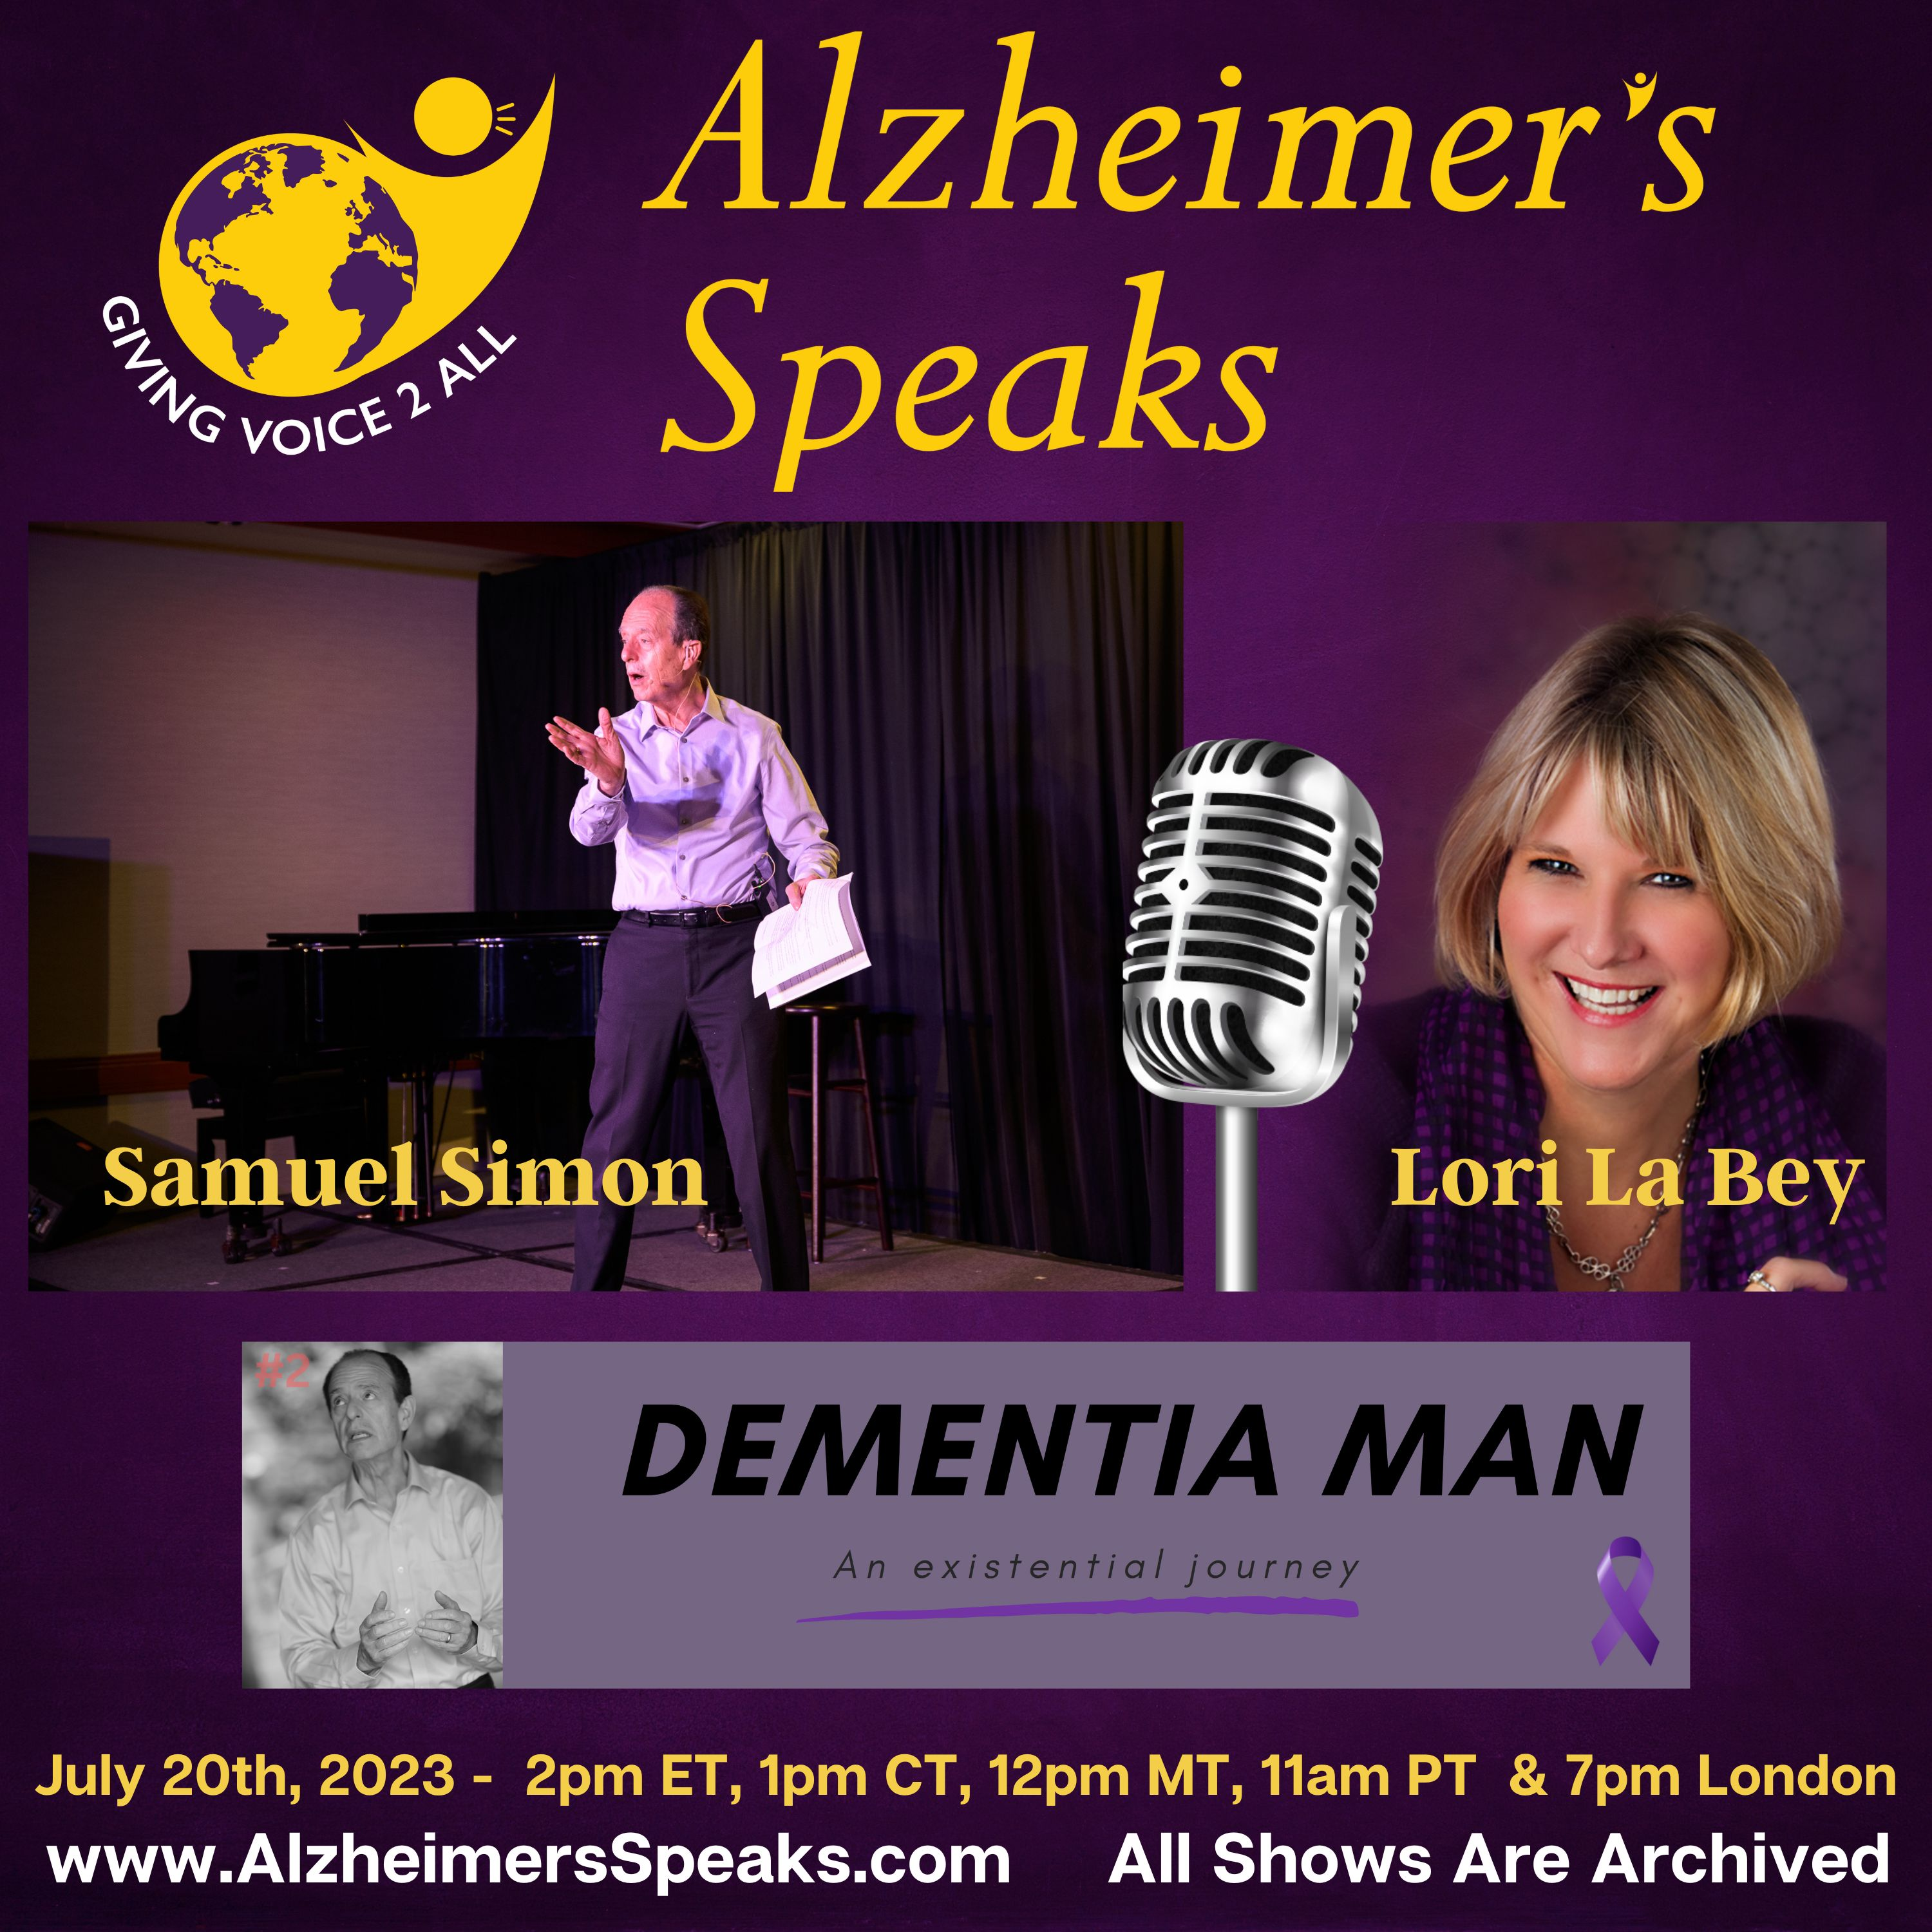 Samuel A. Simon Is Dementia Man - The Man and The Play